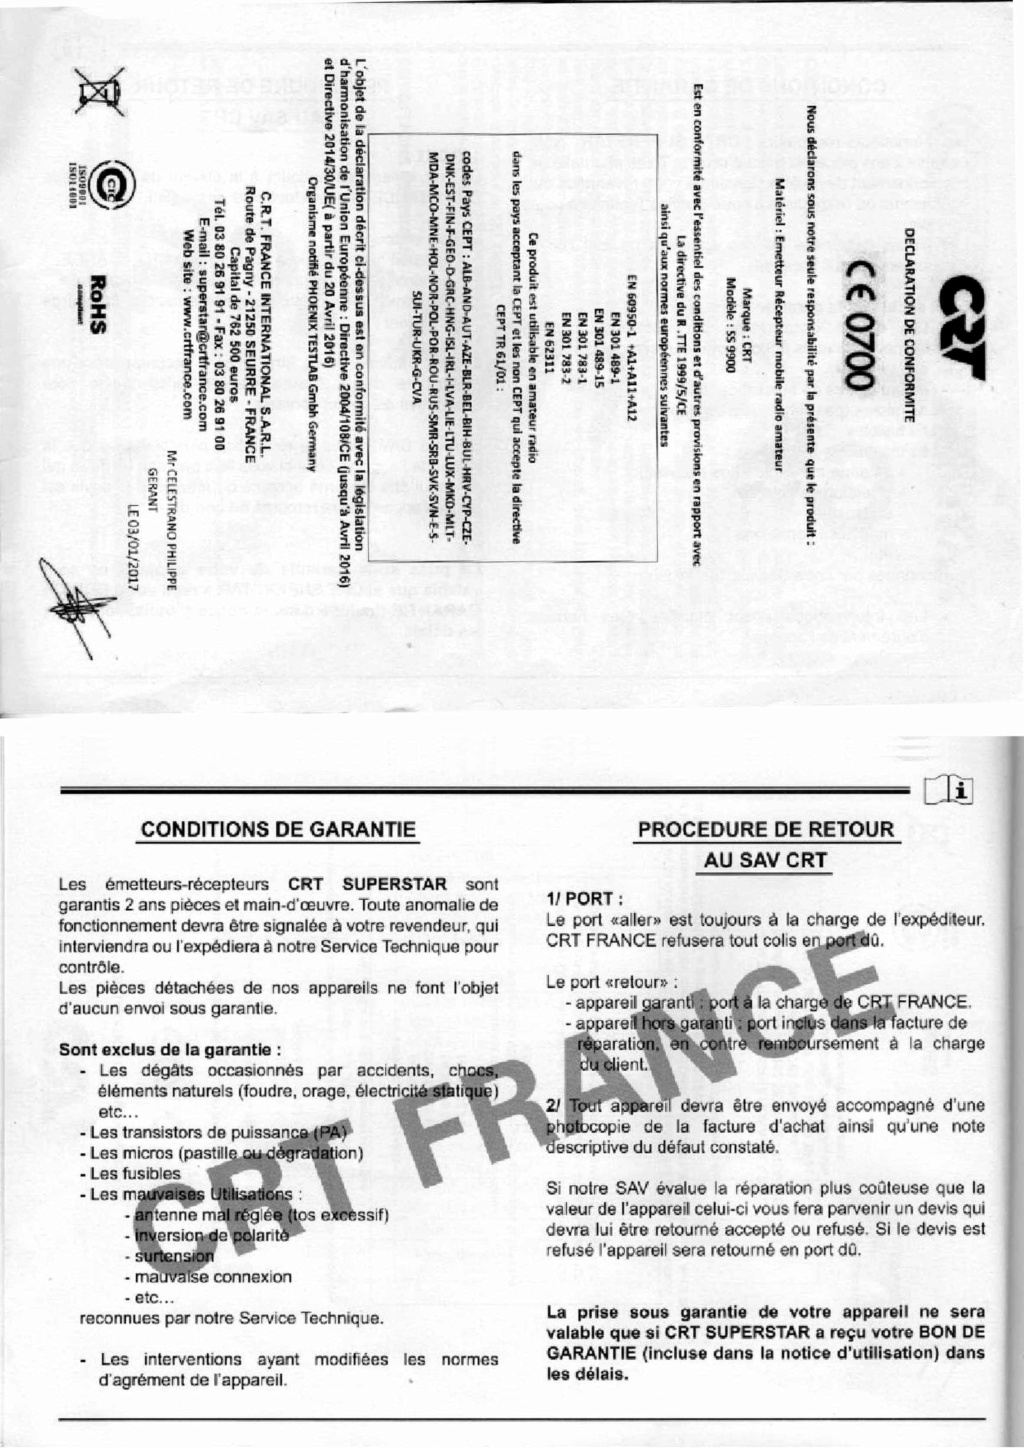 CRT SS 9900 v4 (Mobile) - Page 17 Feuill22